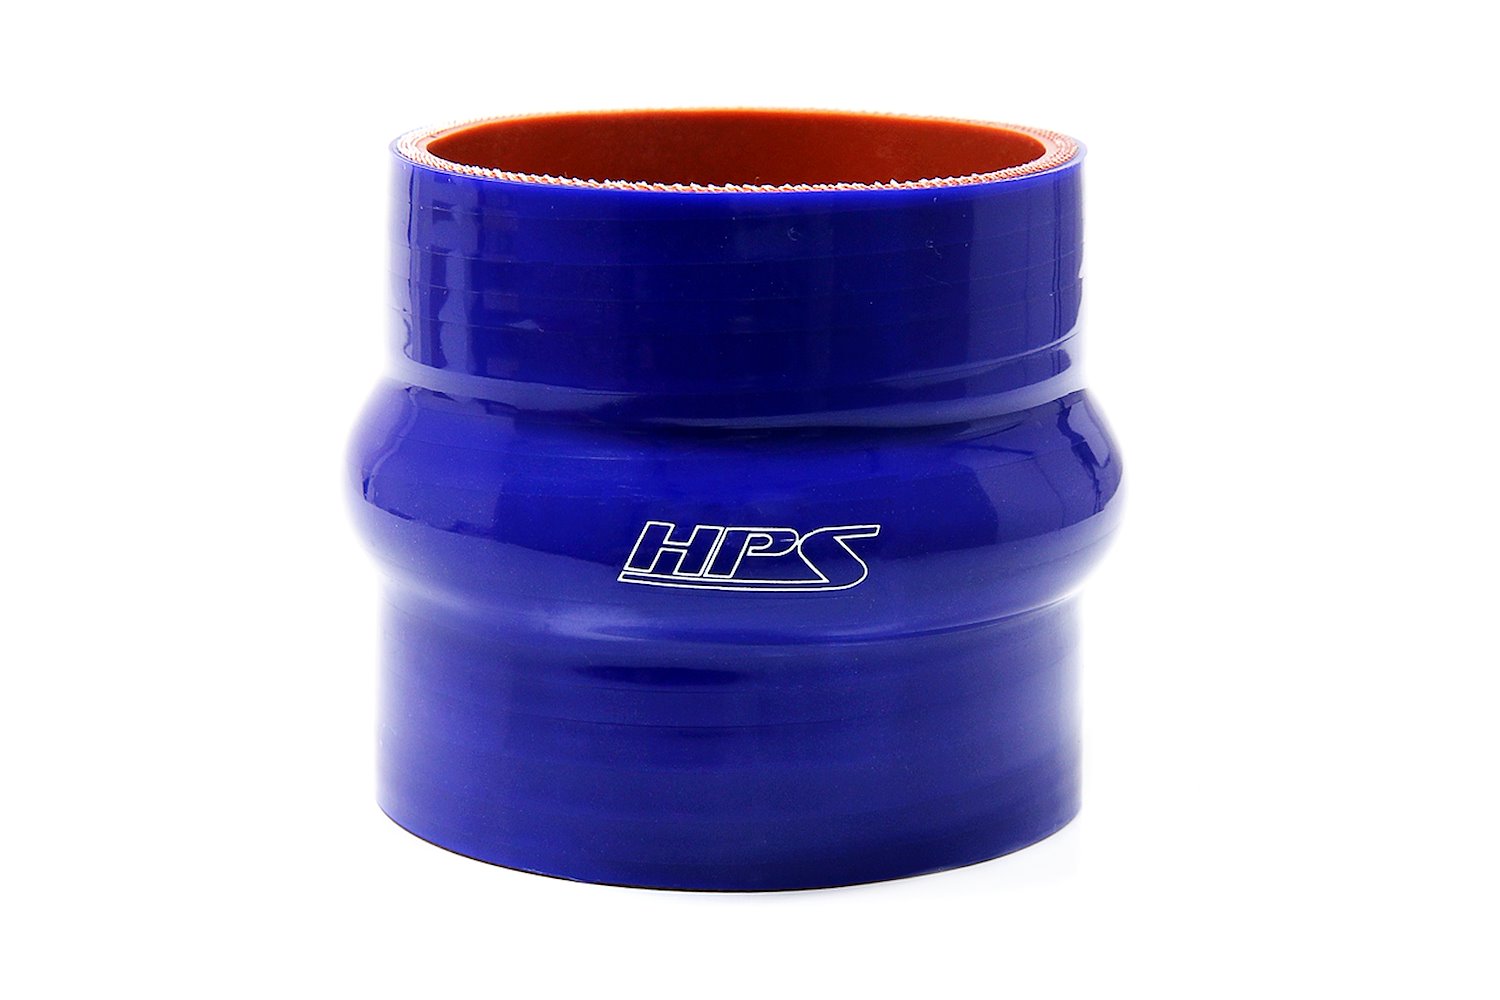 HTSHC-125-L6-BLUE Silicone Hump Coupler Hose, High-Temp 4-Ply Reinforced, 1-1/4 in. ID, 6 in. Long, Blue